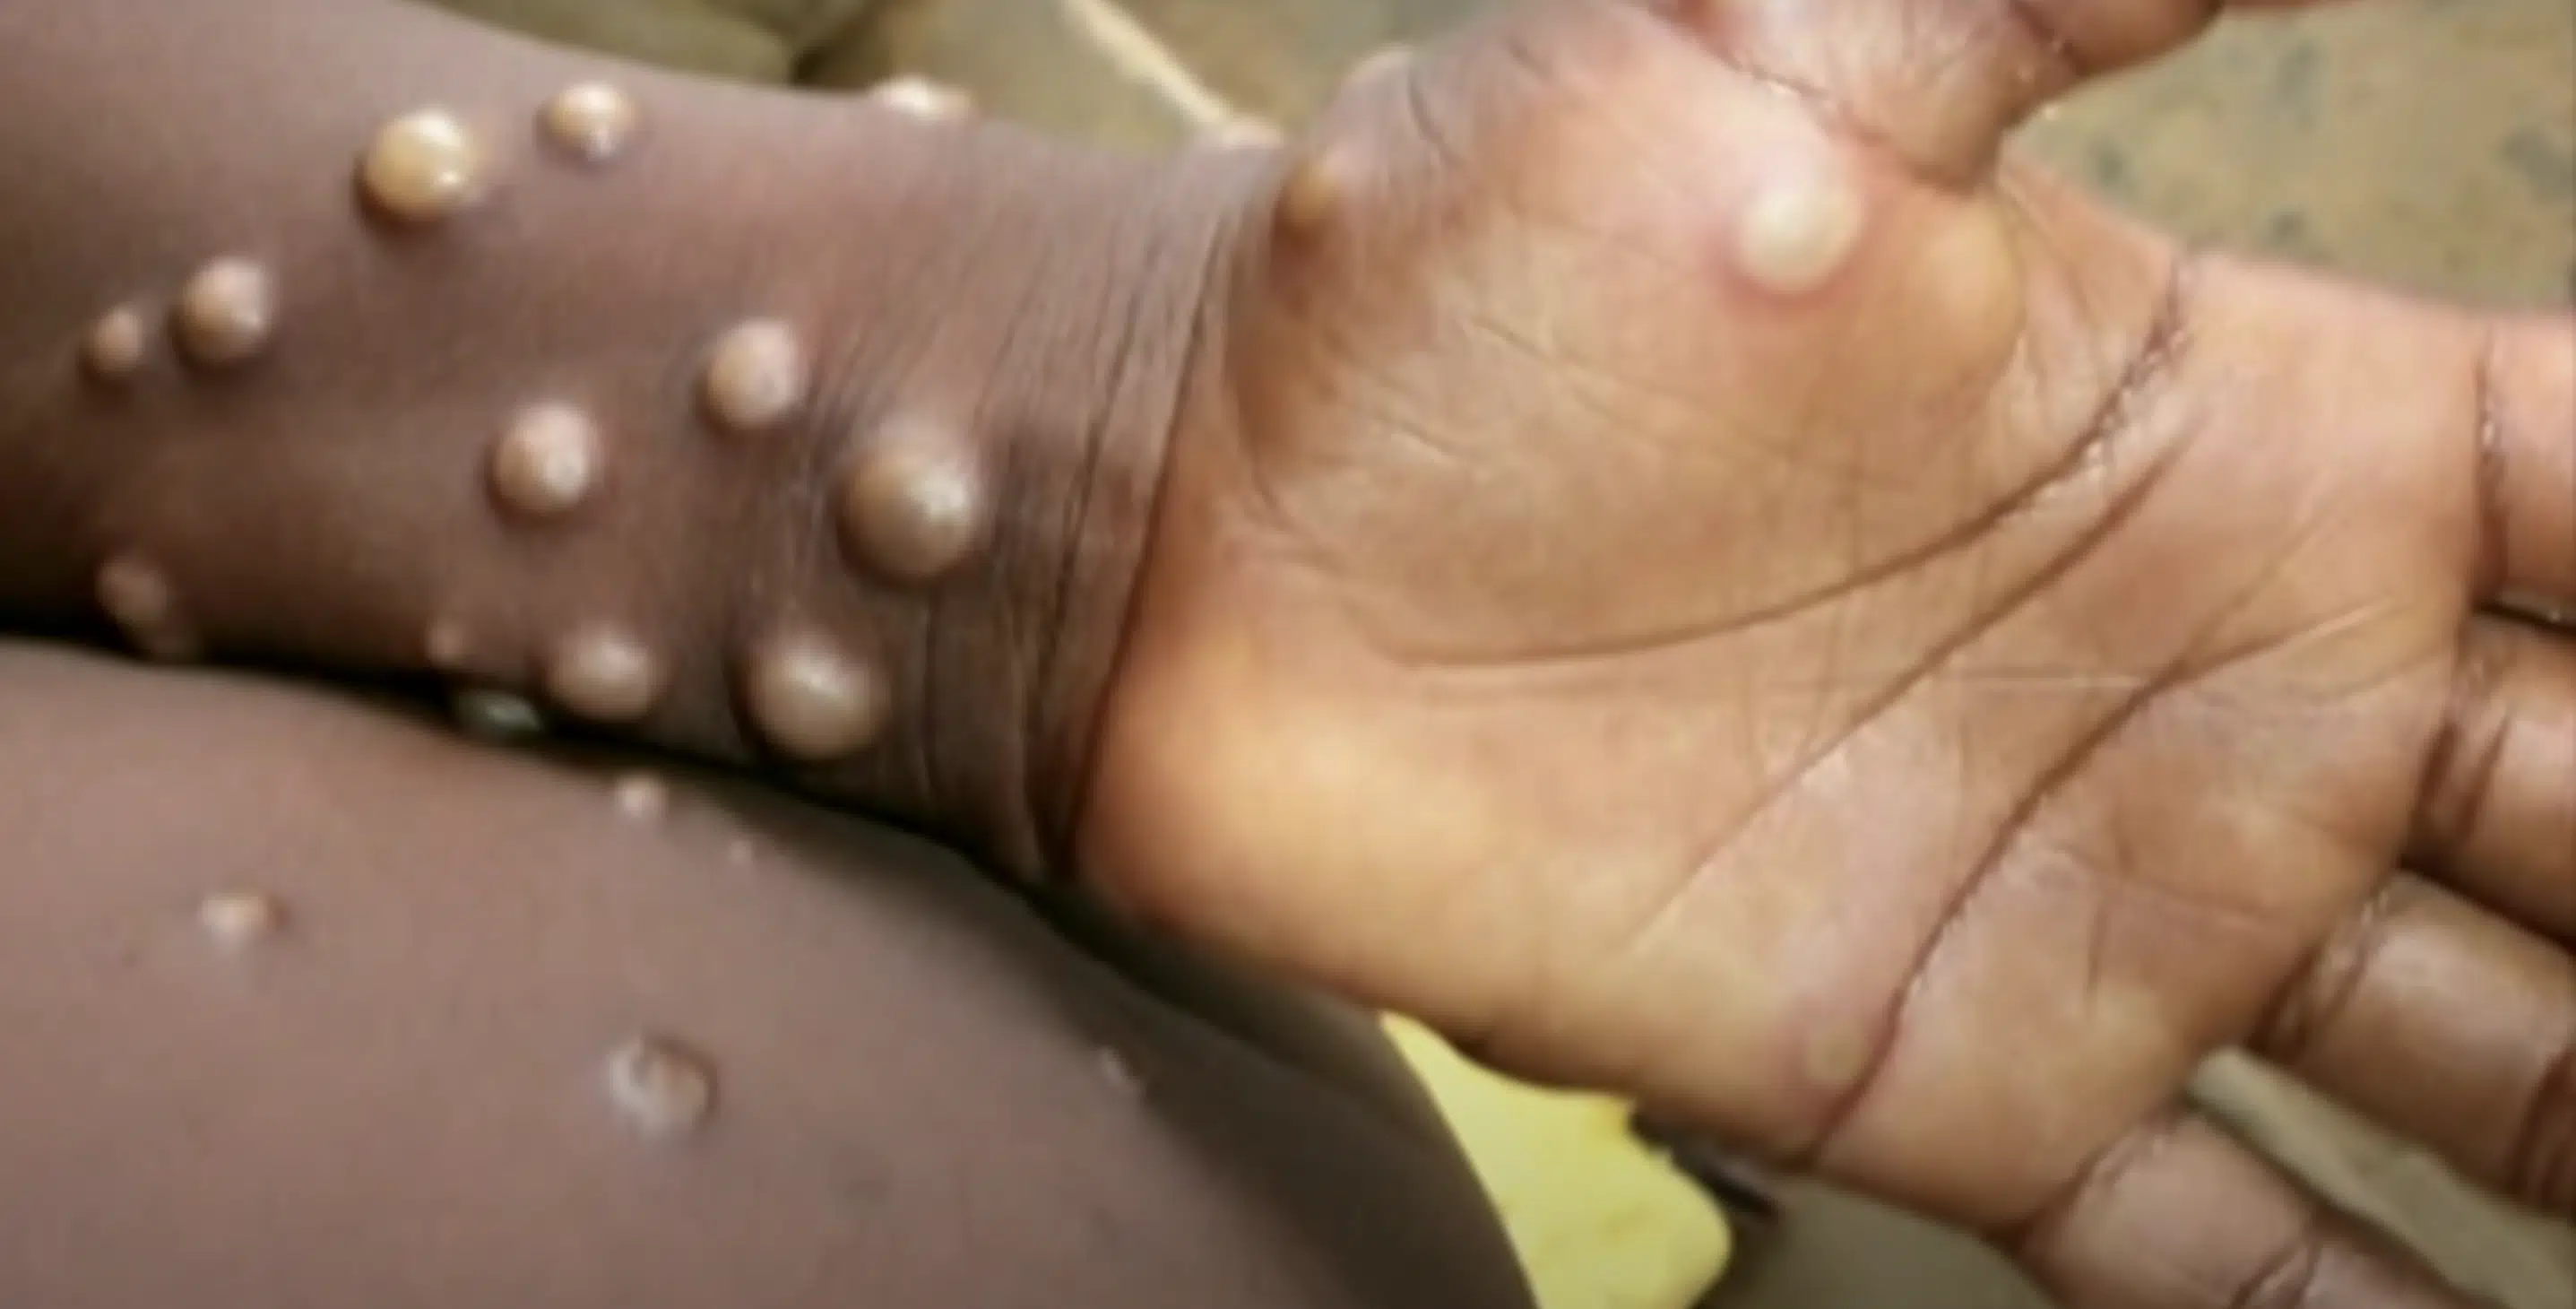 Global Monkeypox Outbreak Calls for Action From WHO Leaders